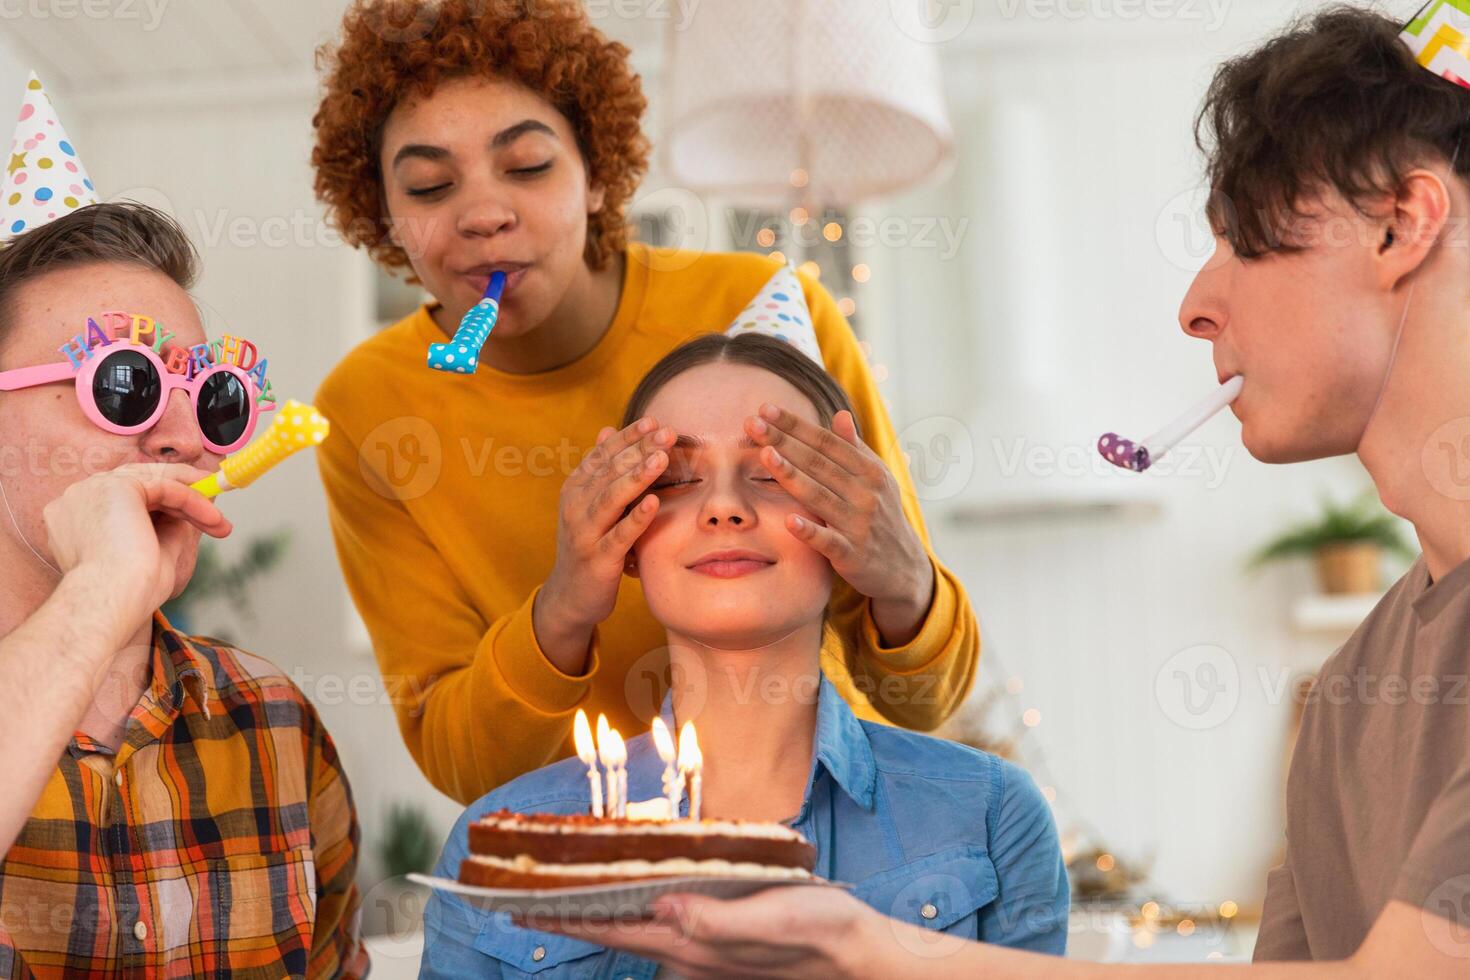 Make a wish. Woman wearing party cap blowing out burning candles on birthday cake. Happy Birthday party. Group of friends wishes girl happy birthday. People celebrating birthday with party at home photo